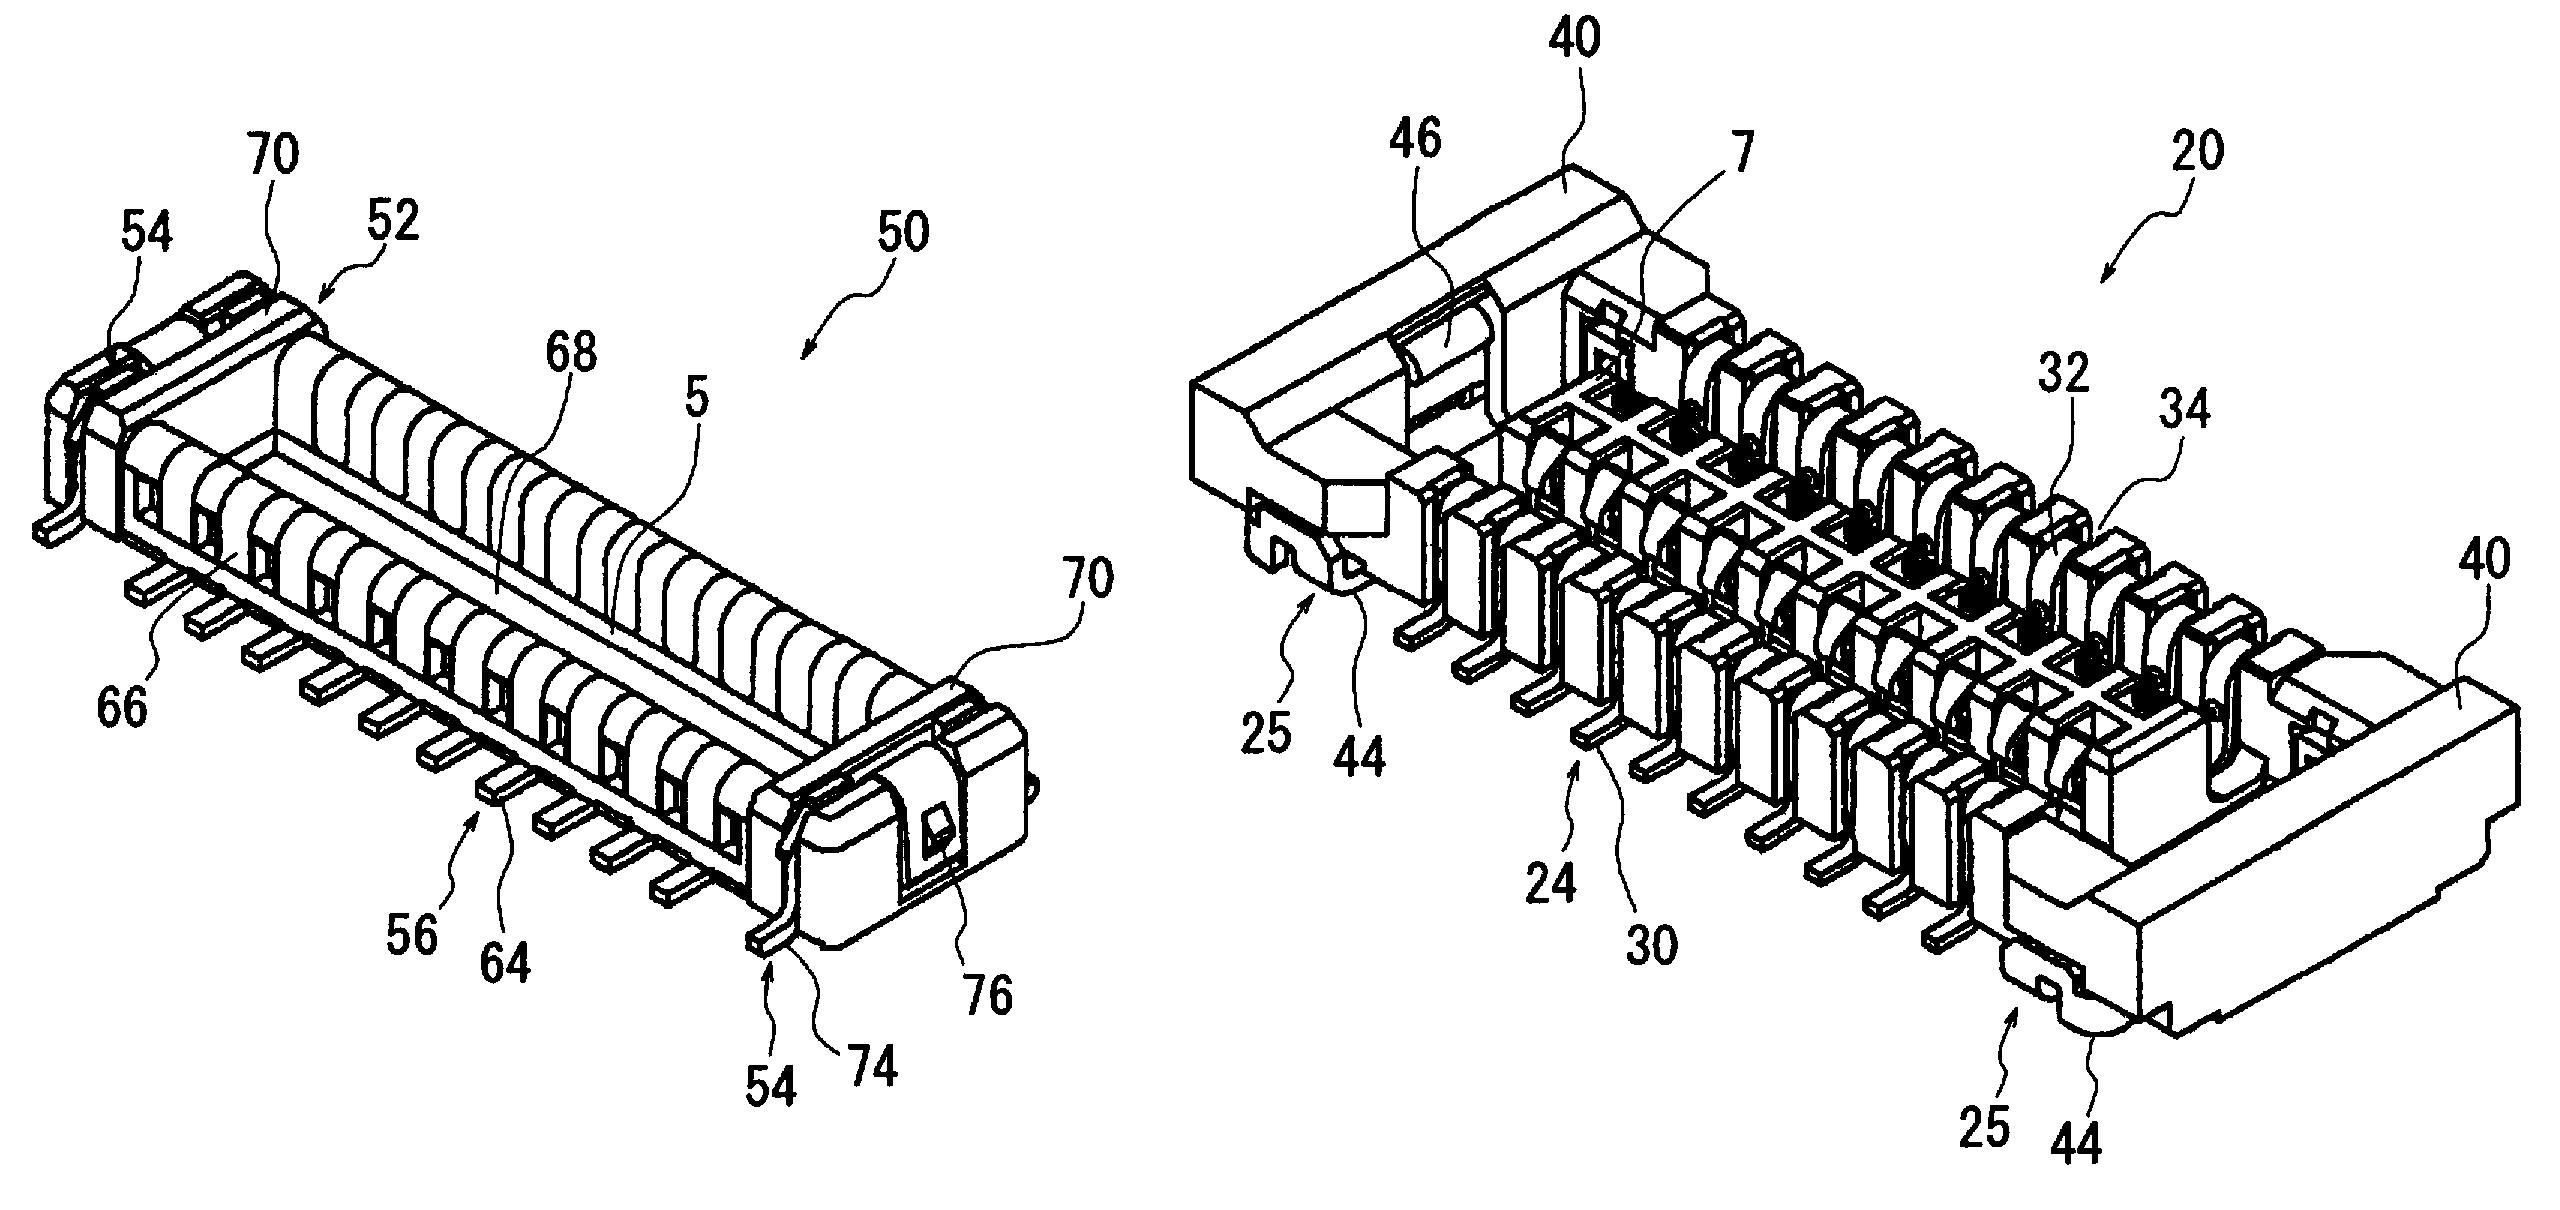 Receptacle and a plug with fixtures to attach to substrates and engaging each other to form a power supply contact